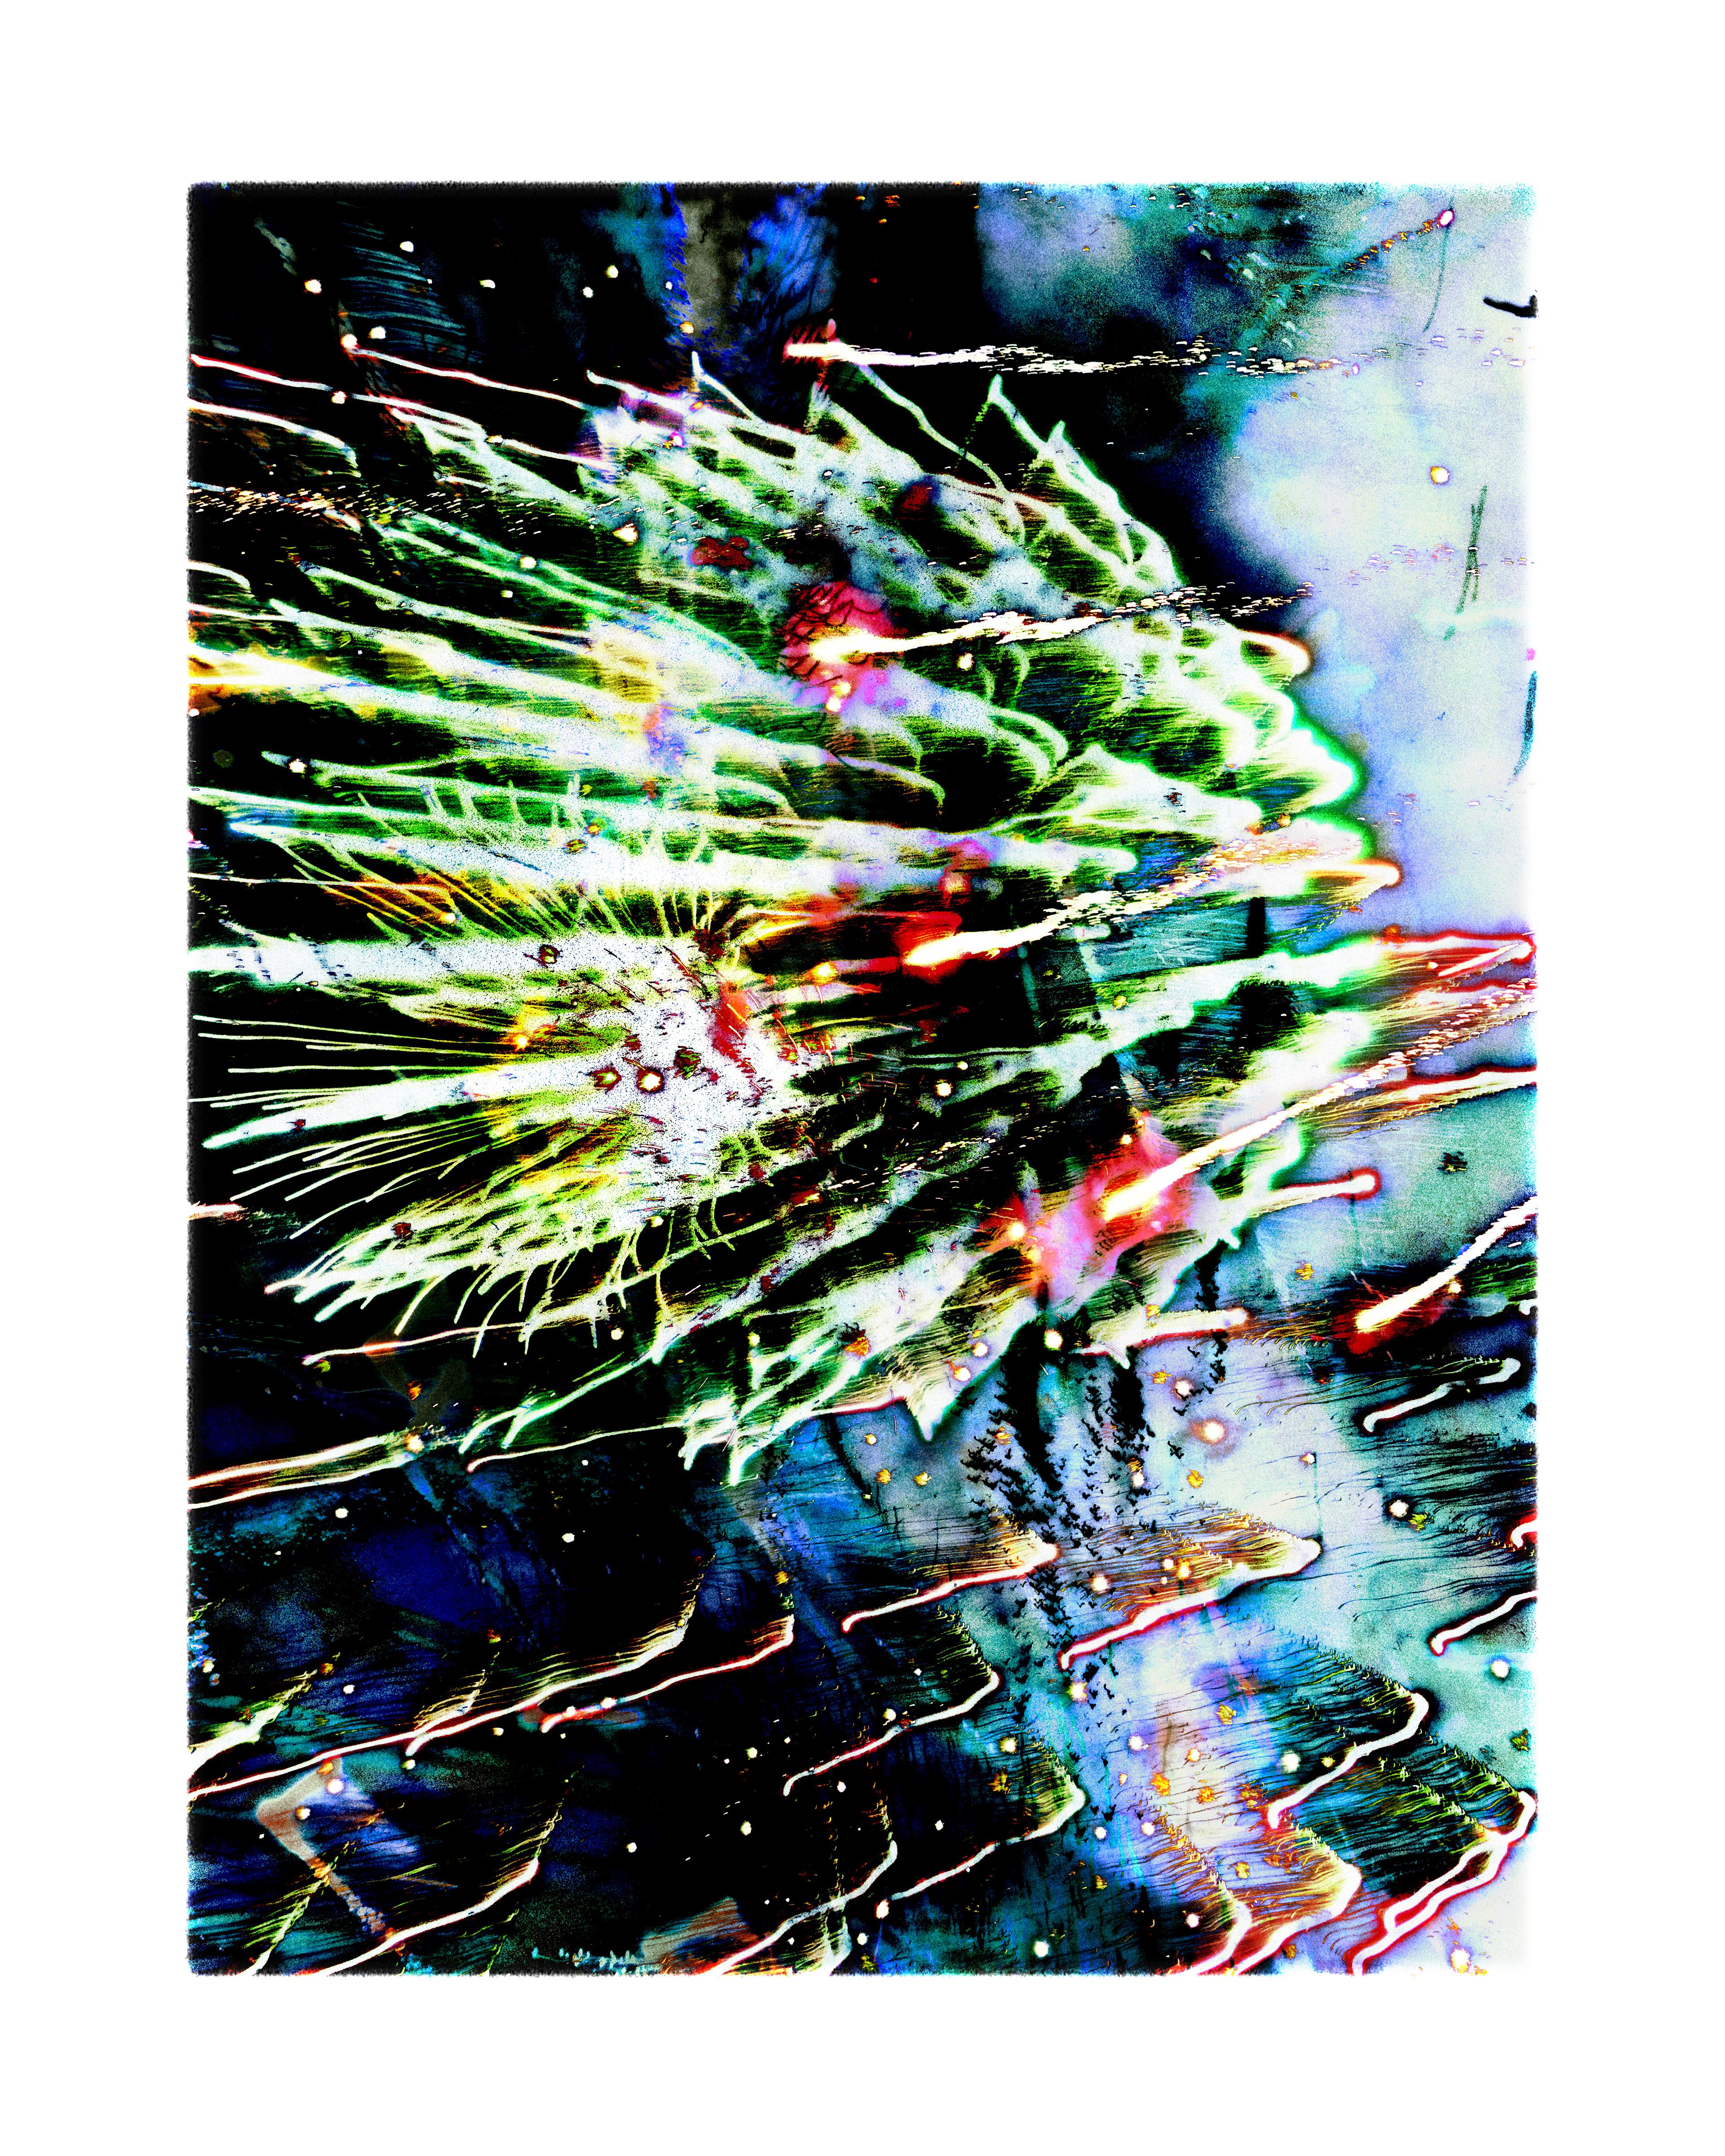 "Explosure, #13" by Tom & Lois White is available as a hand-signed and numbered archival pigment print on heavyweight cold press cotton rag paper in the following editions: 
40x52in; edition of 3
26x36in; edition of 12

*Custom framing options